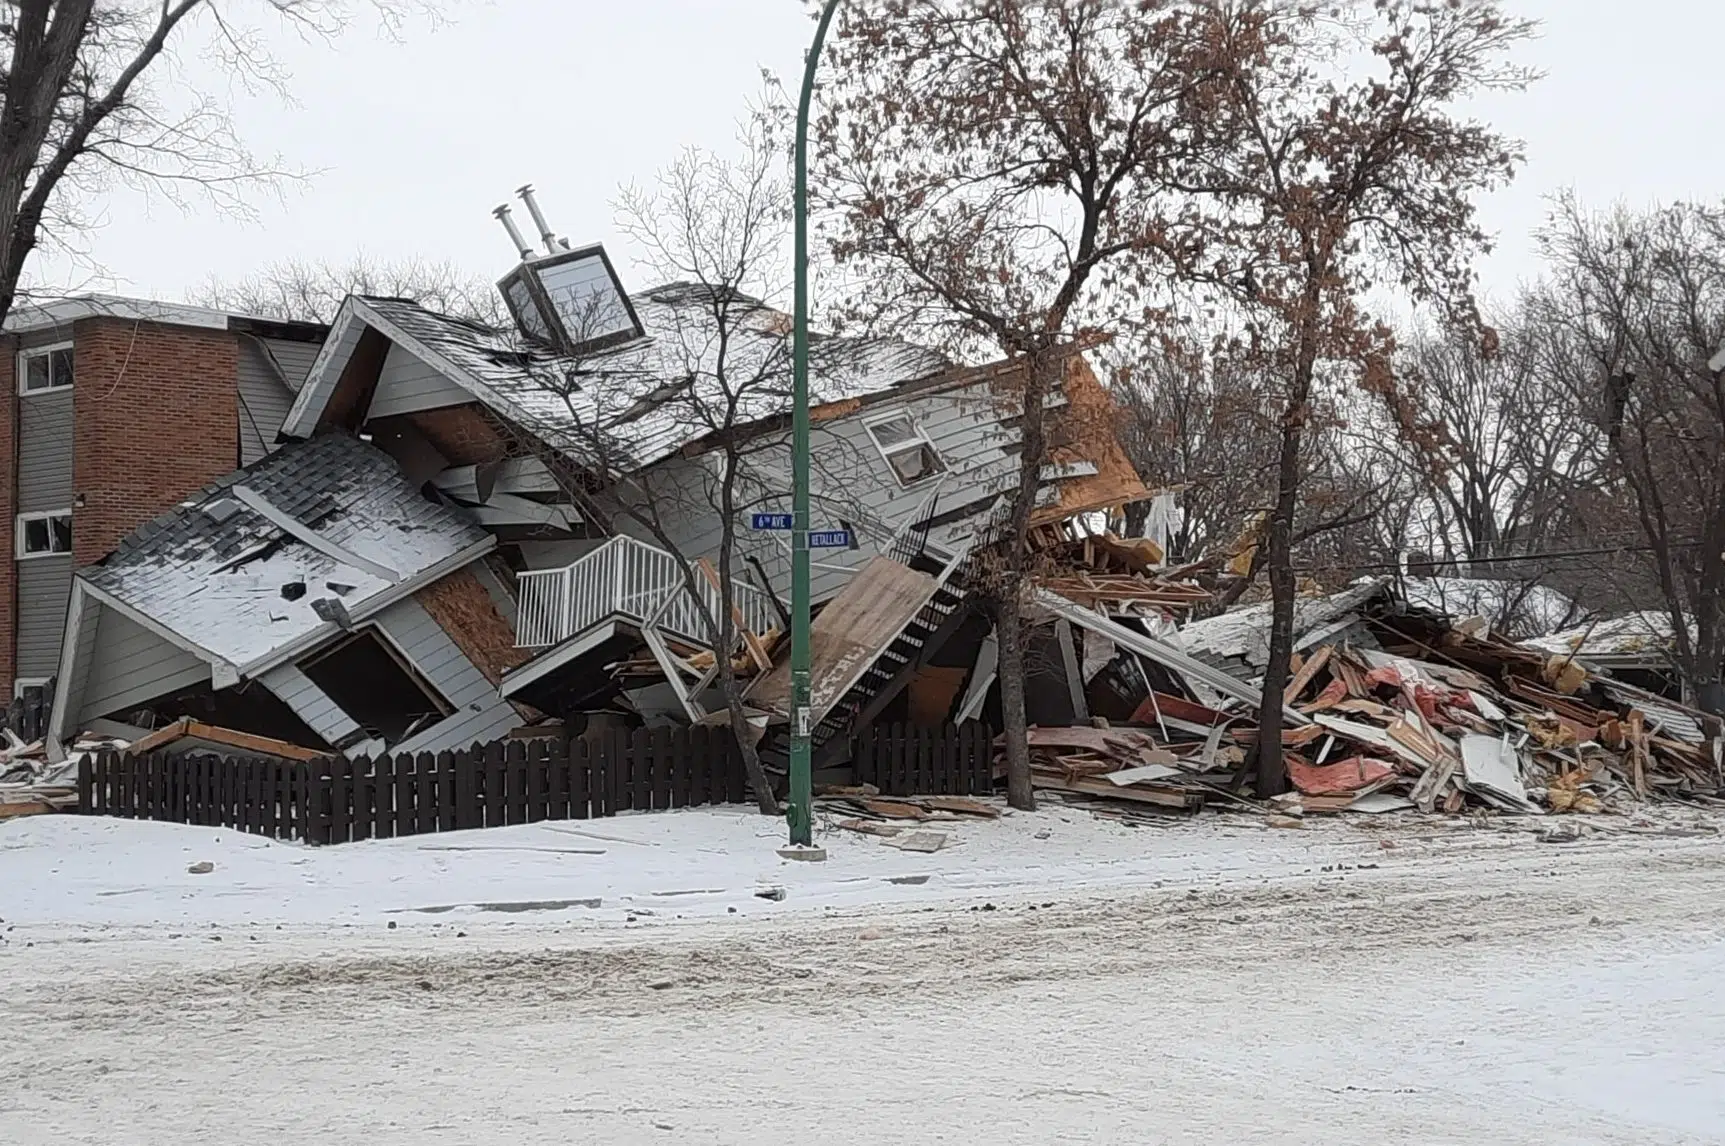 Regina fire department says 'compromised' gas line at fault in house explosion